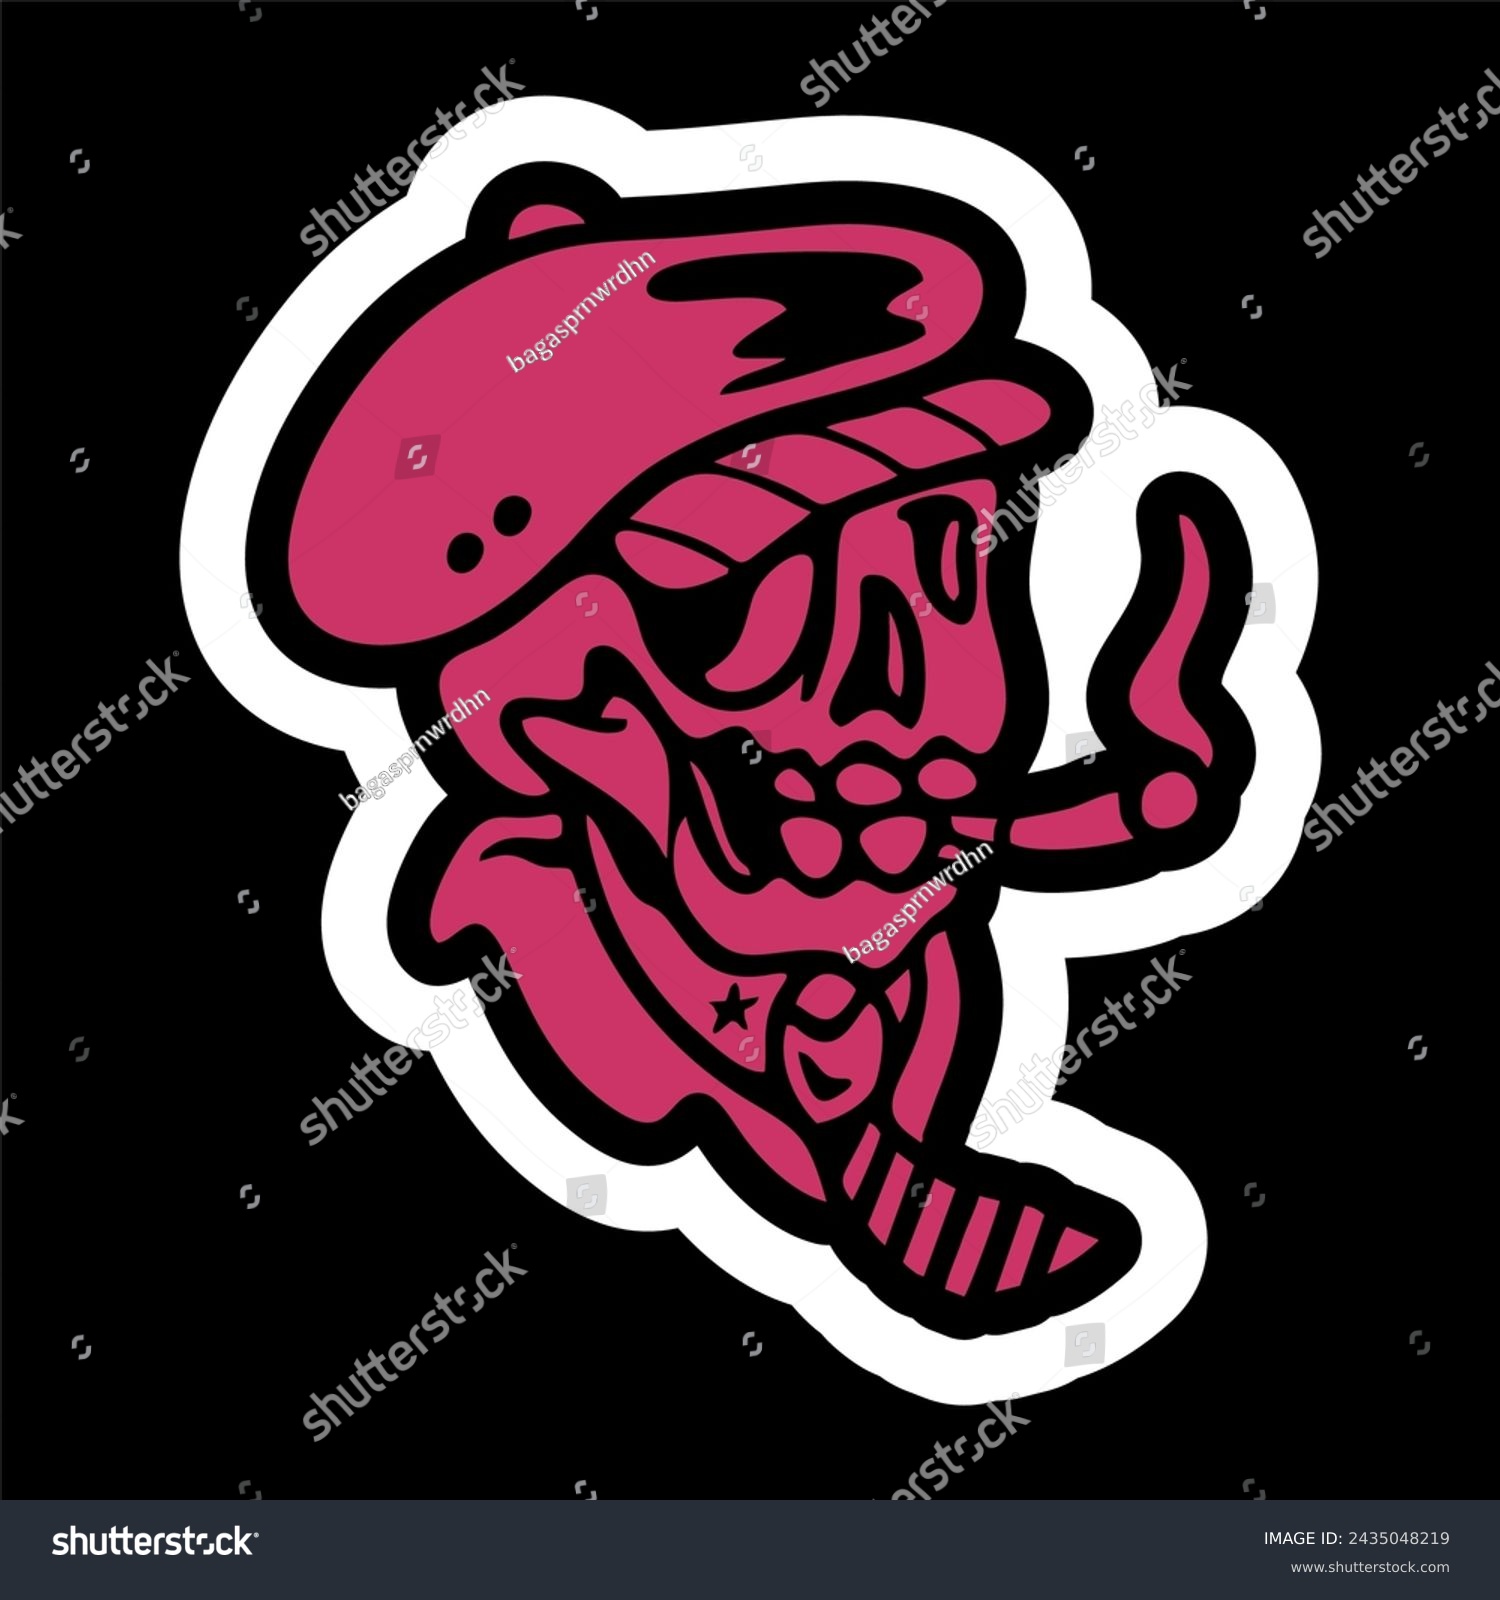 SVG of vector illustration artwork of skeleton skull head wearing flat cap classic hat with tie and smoking cigarette.Can be used as Logo, Brands, Mascots, tshirt, sticker,patch and Tattoo design.
 svg